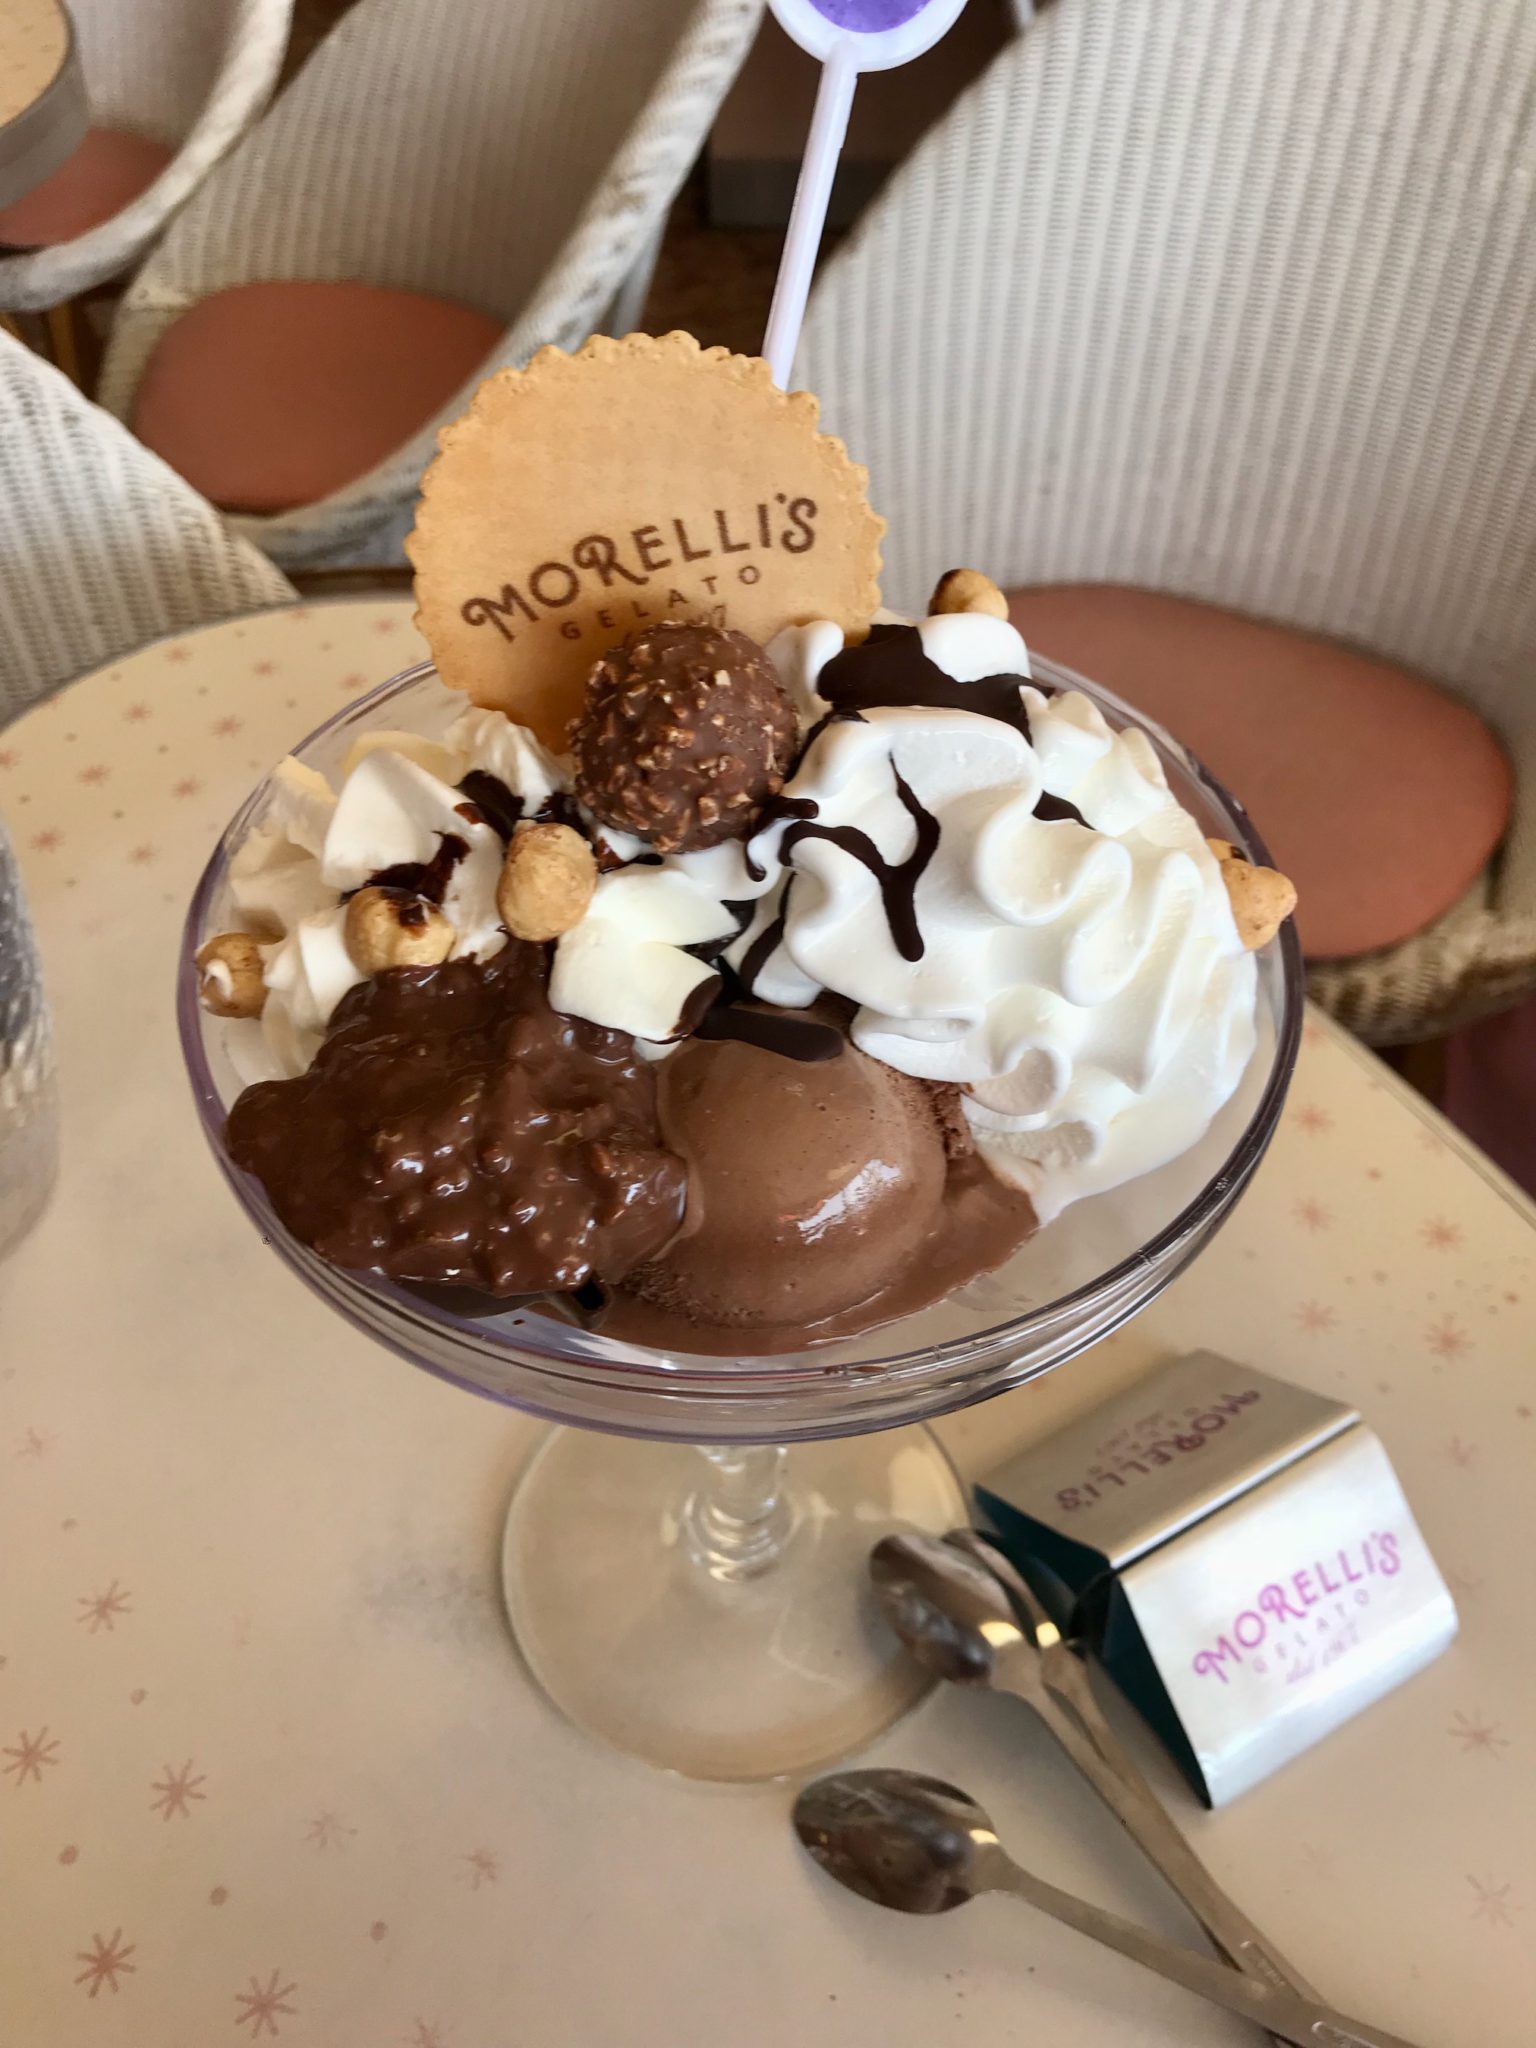 One of the best things to do in Broadstairs - eat a delicious ice cream sunday at Morelli's 